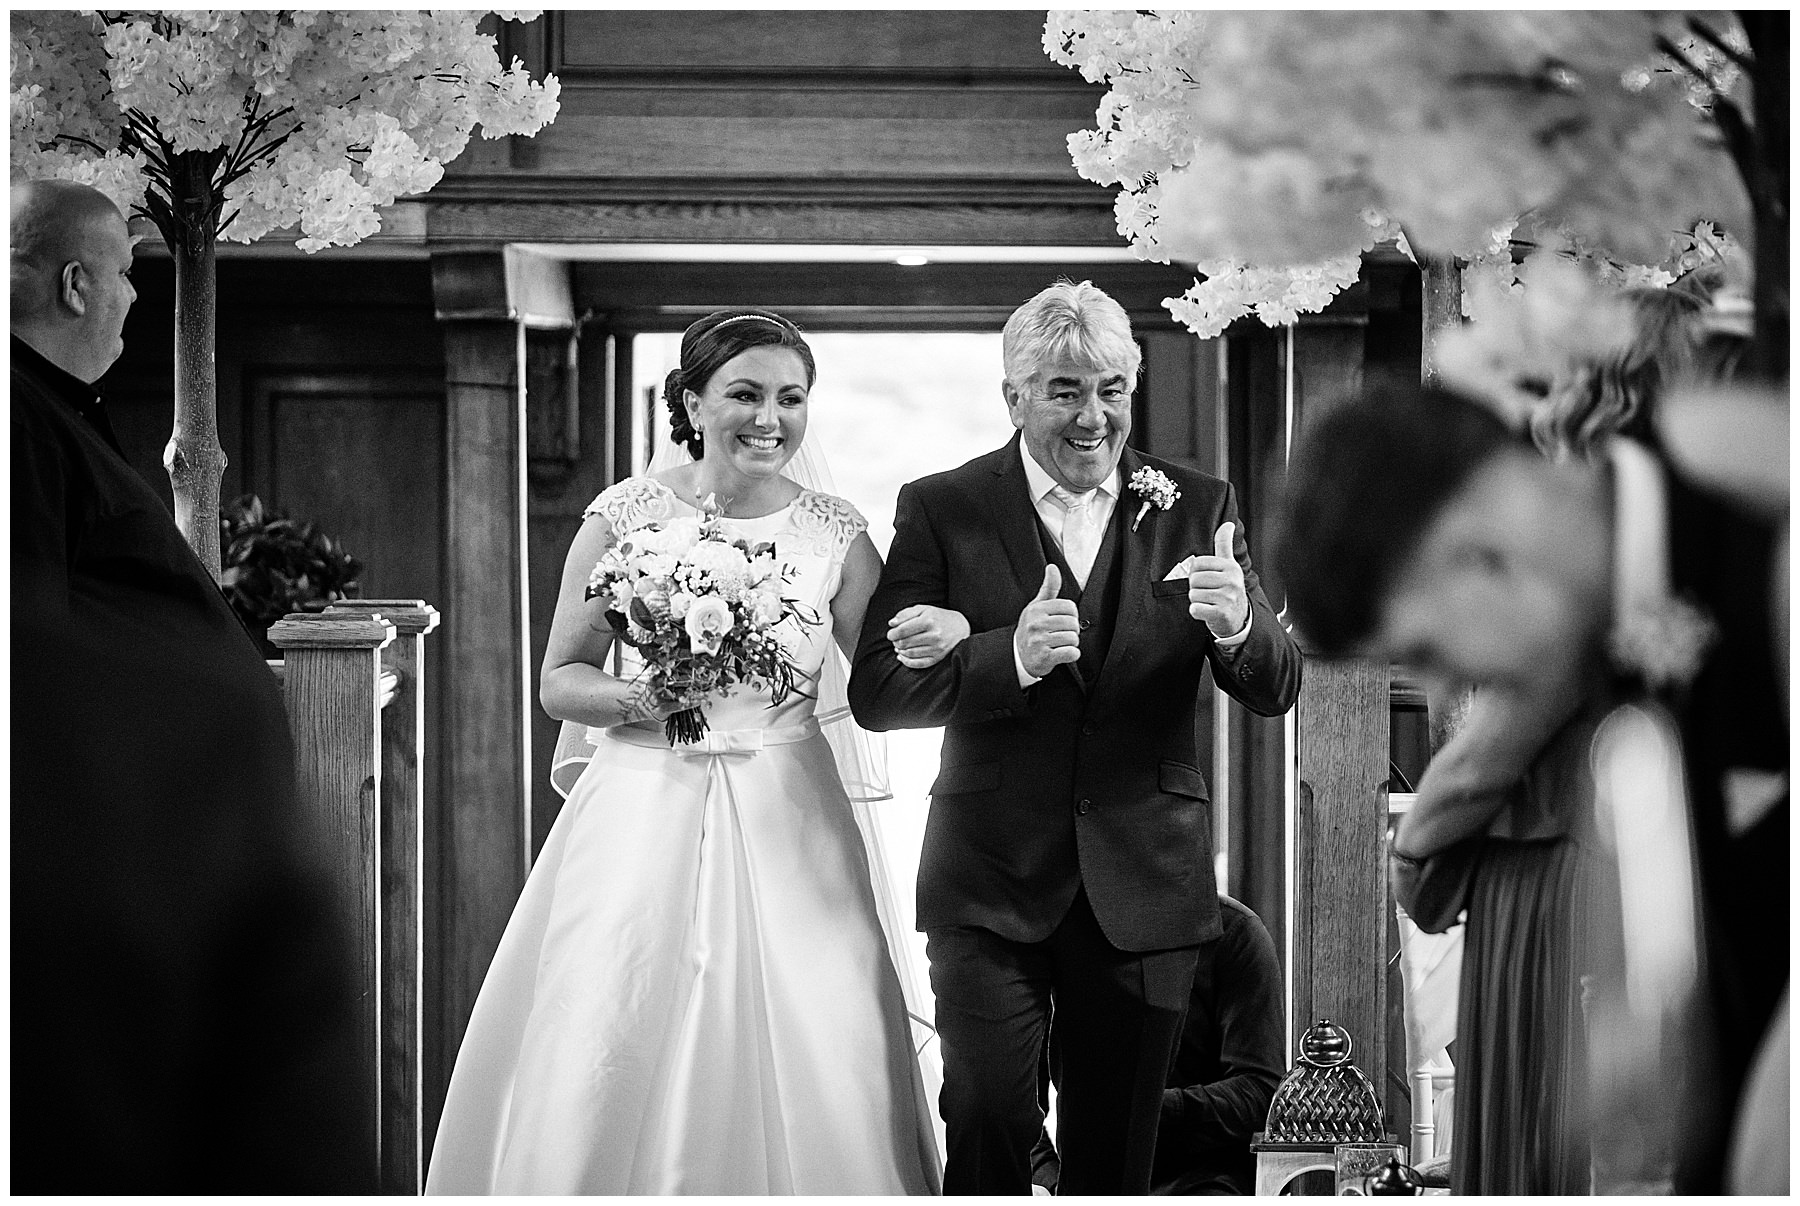 Photographs that capture the story and emotion as the bridal party make their entrance to the wedding ceremony in the Chapel at Hawkstone Hall in Shrewsbury by Documentary Wedding Photographer Stuart James